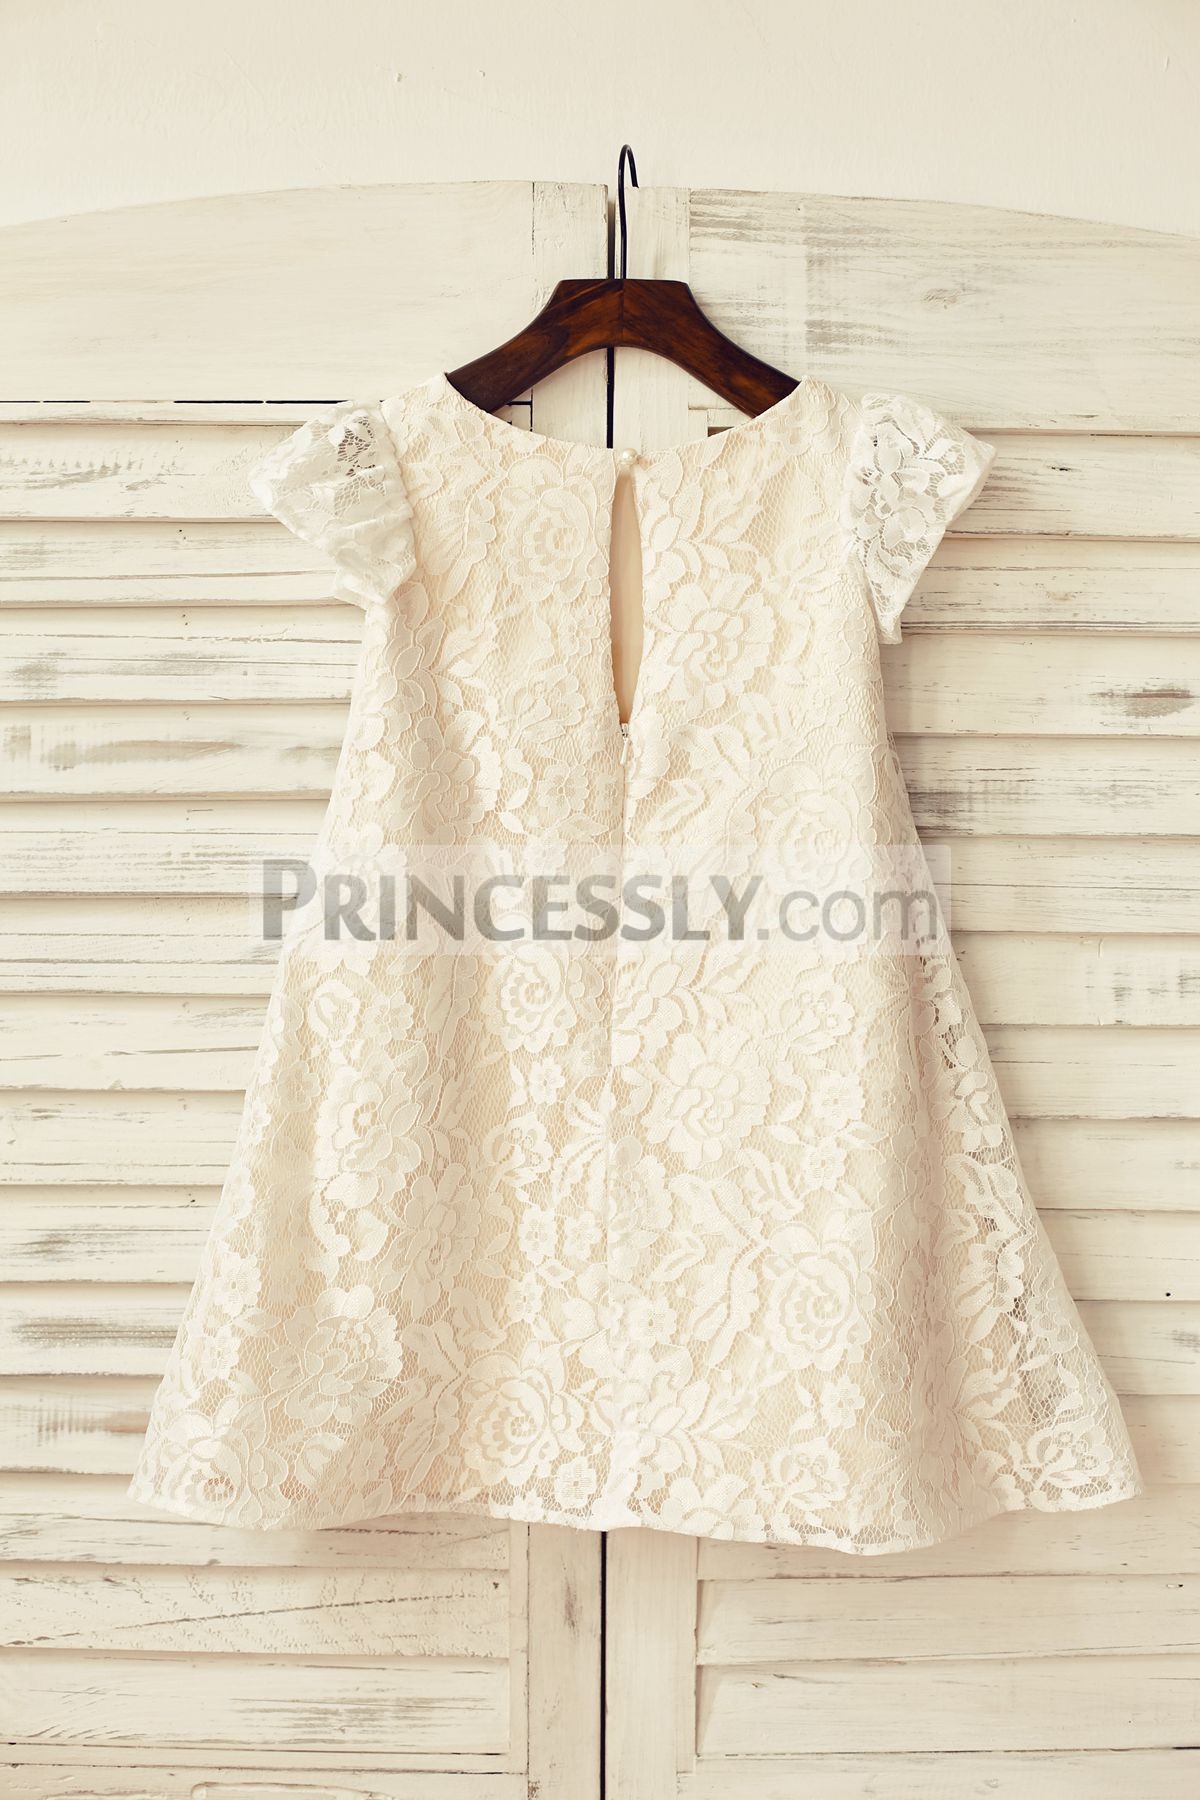 Slit back with a pearl button lace wedding baby girl dress